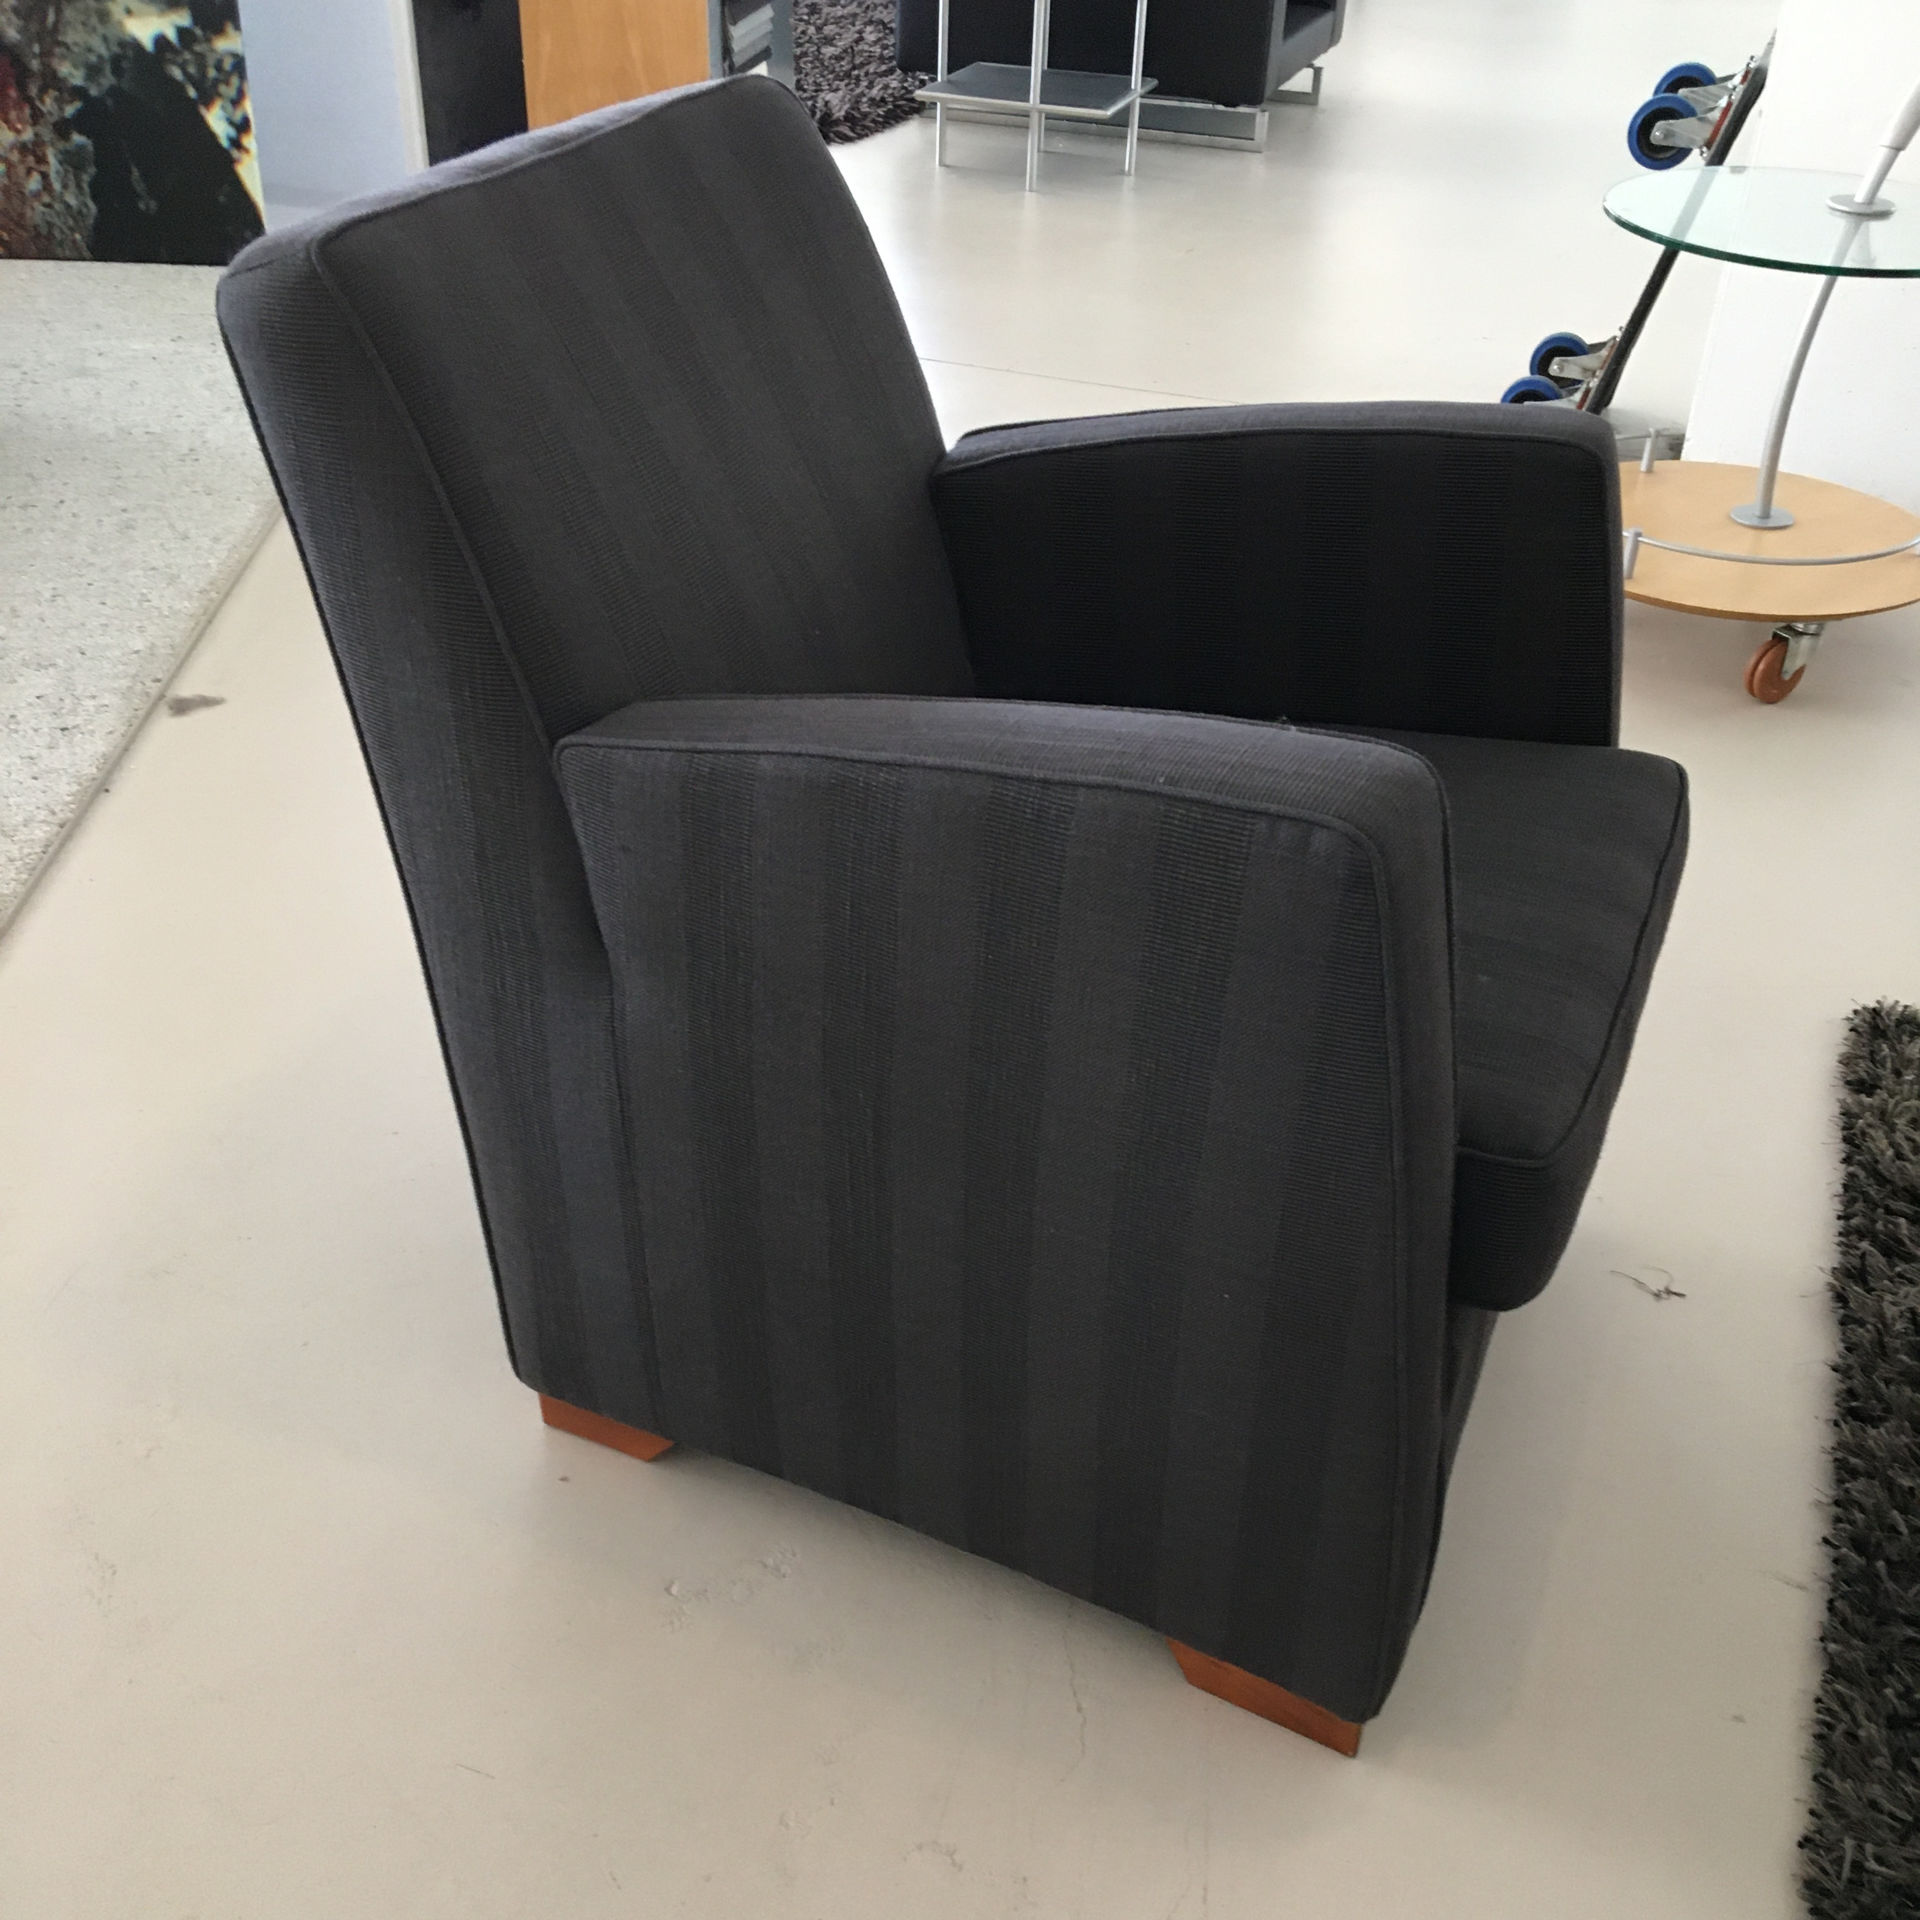 Drie B (3B) relaxfauteuil 